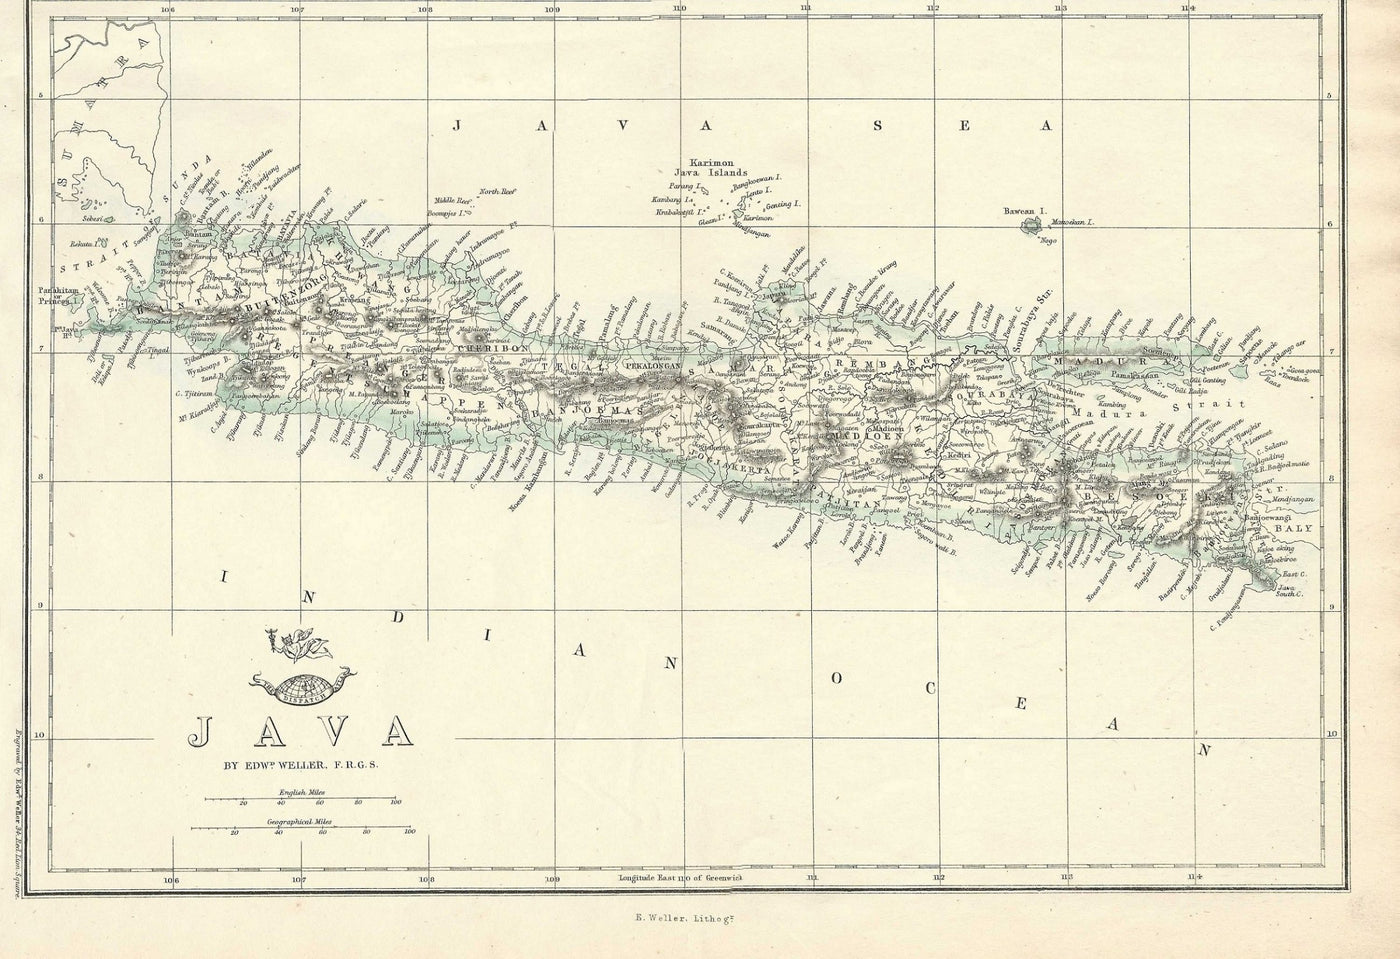 Java Indonesia antique map published 1863